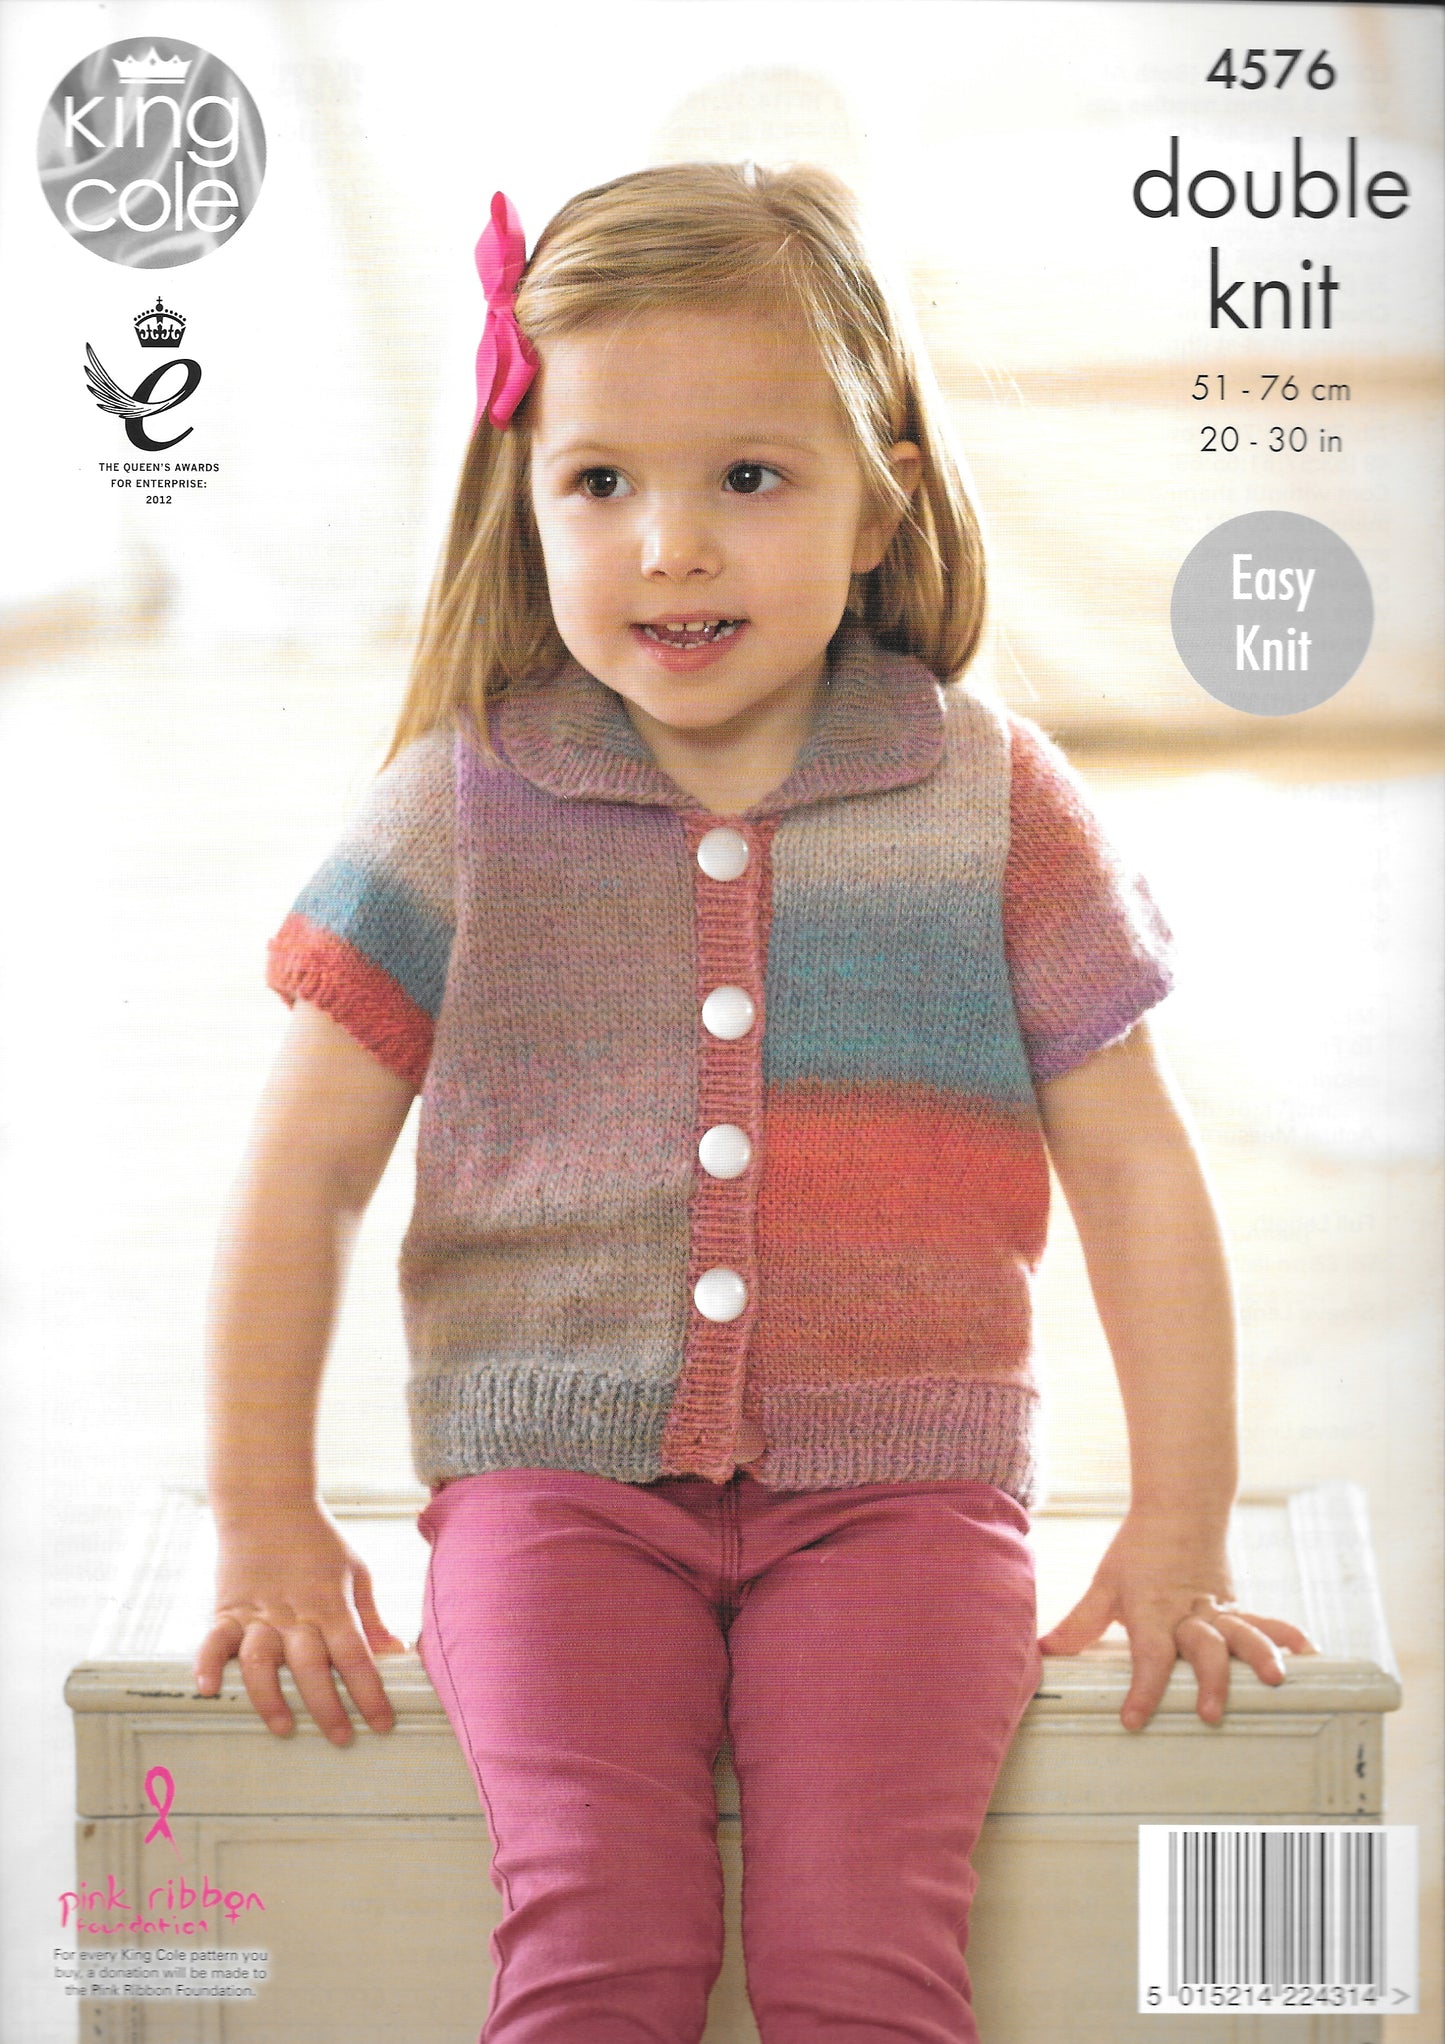 4576 King Cole Double Knit Cardigans knitting pattern